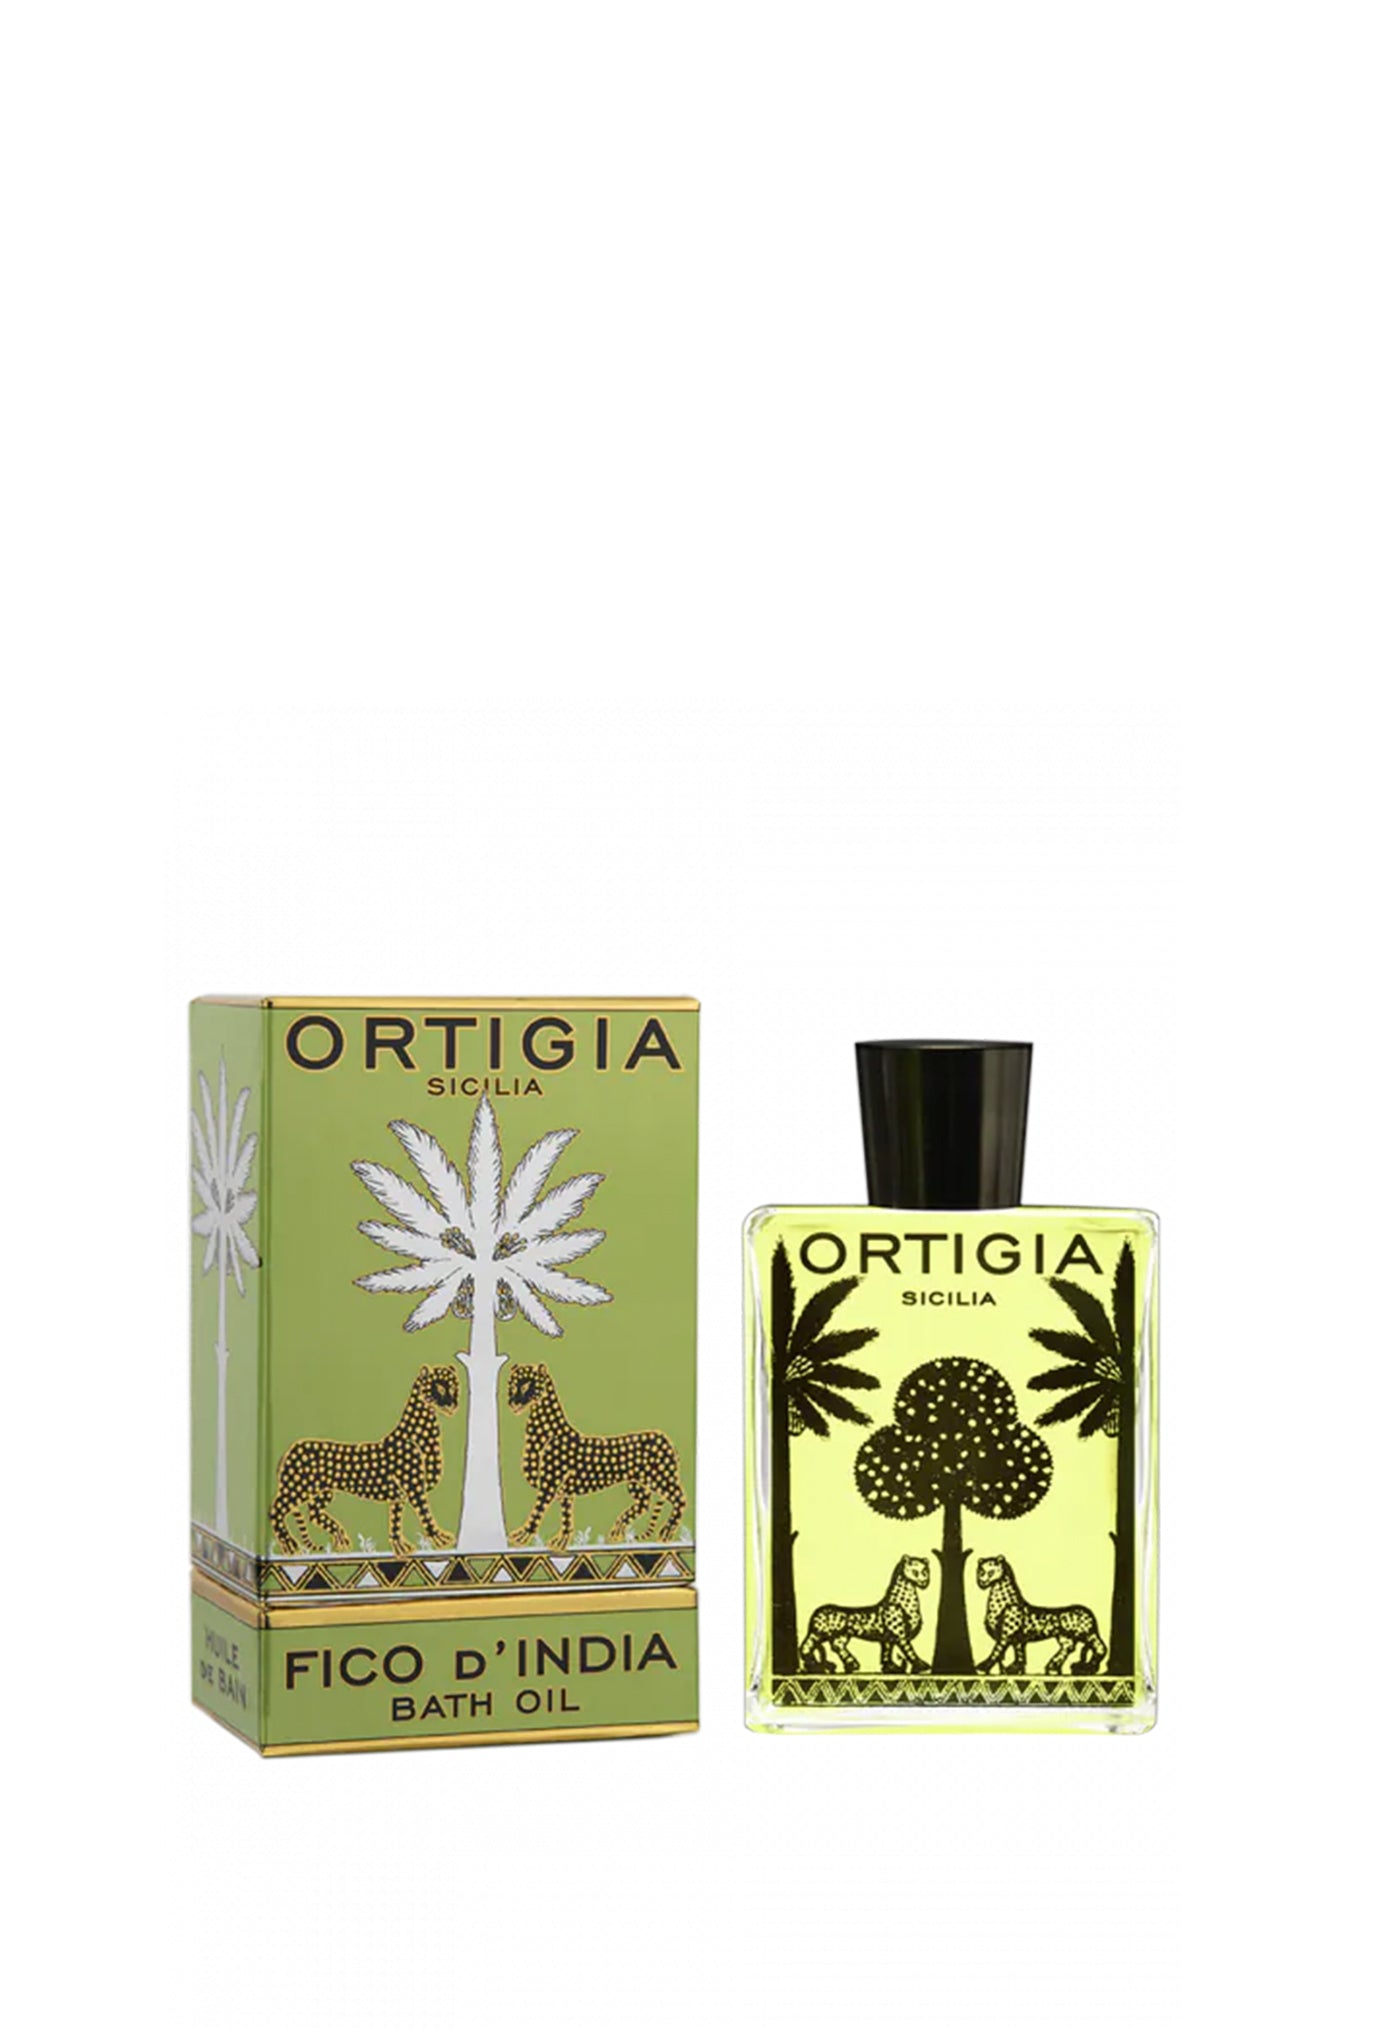 Fico D'India Bath Oil 200ml sold by Angel Divine